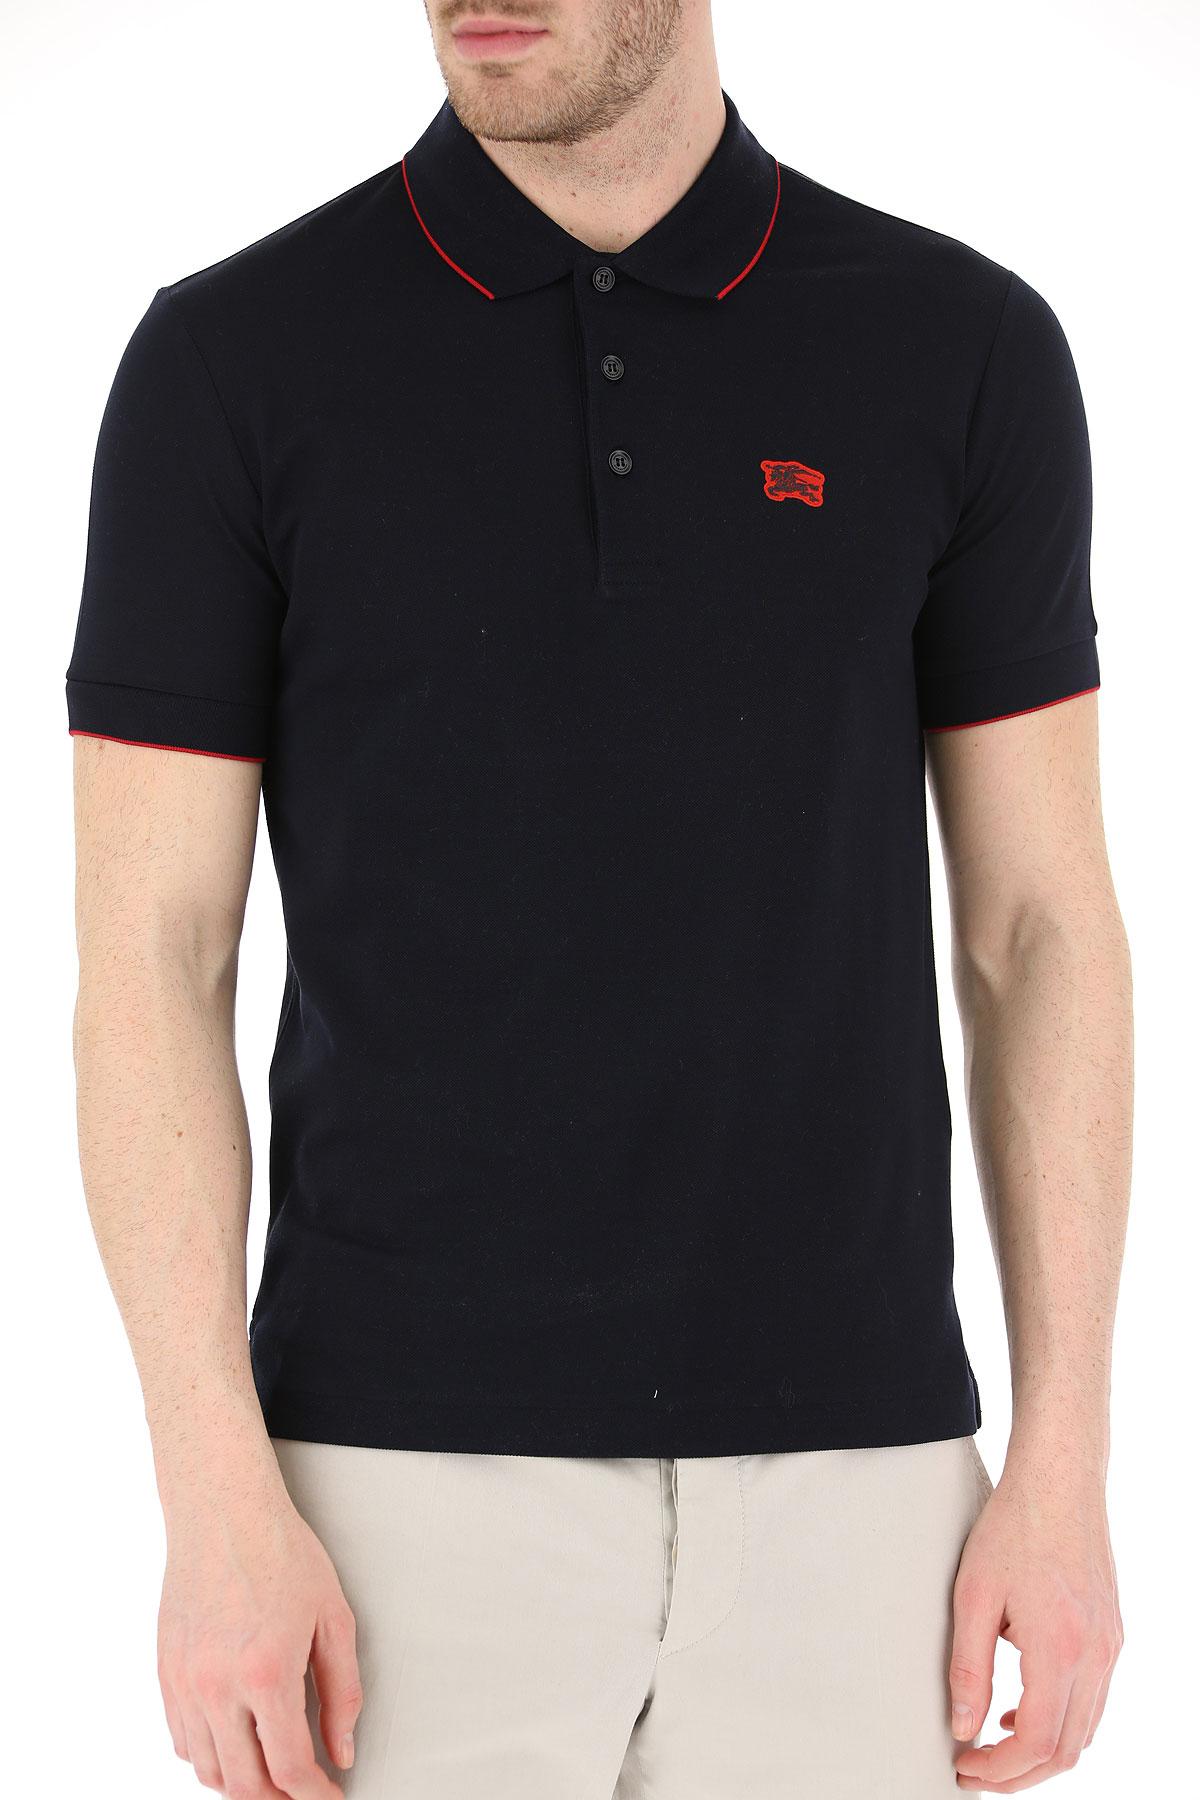 Burberry Cotton Polo Shirt For Men On Sale in Dark Navy Blue (Blue) for